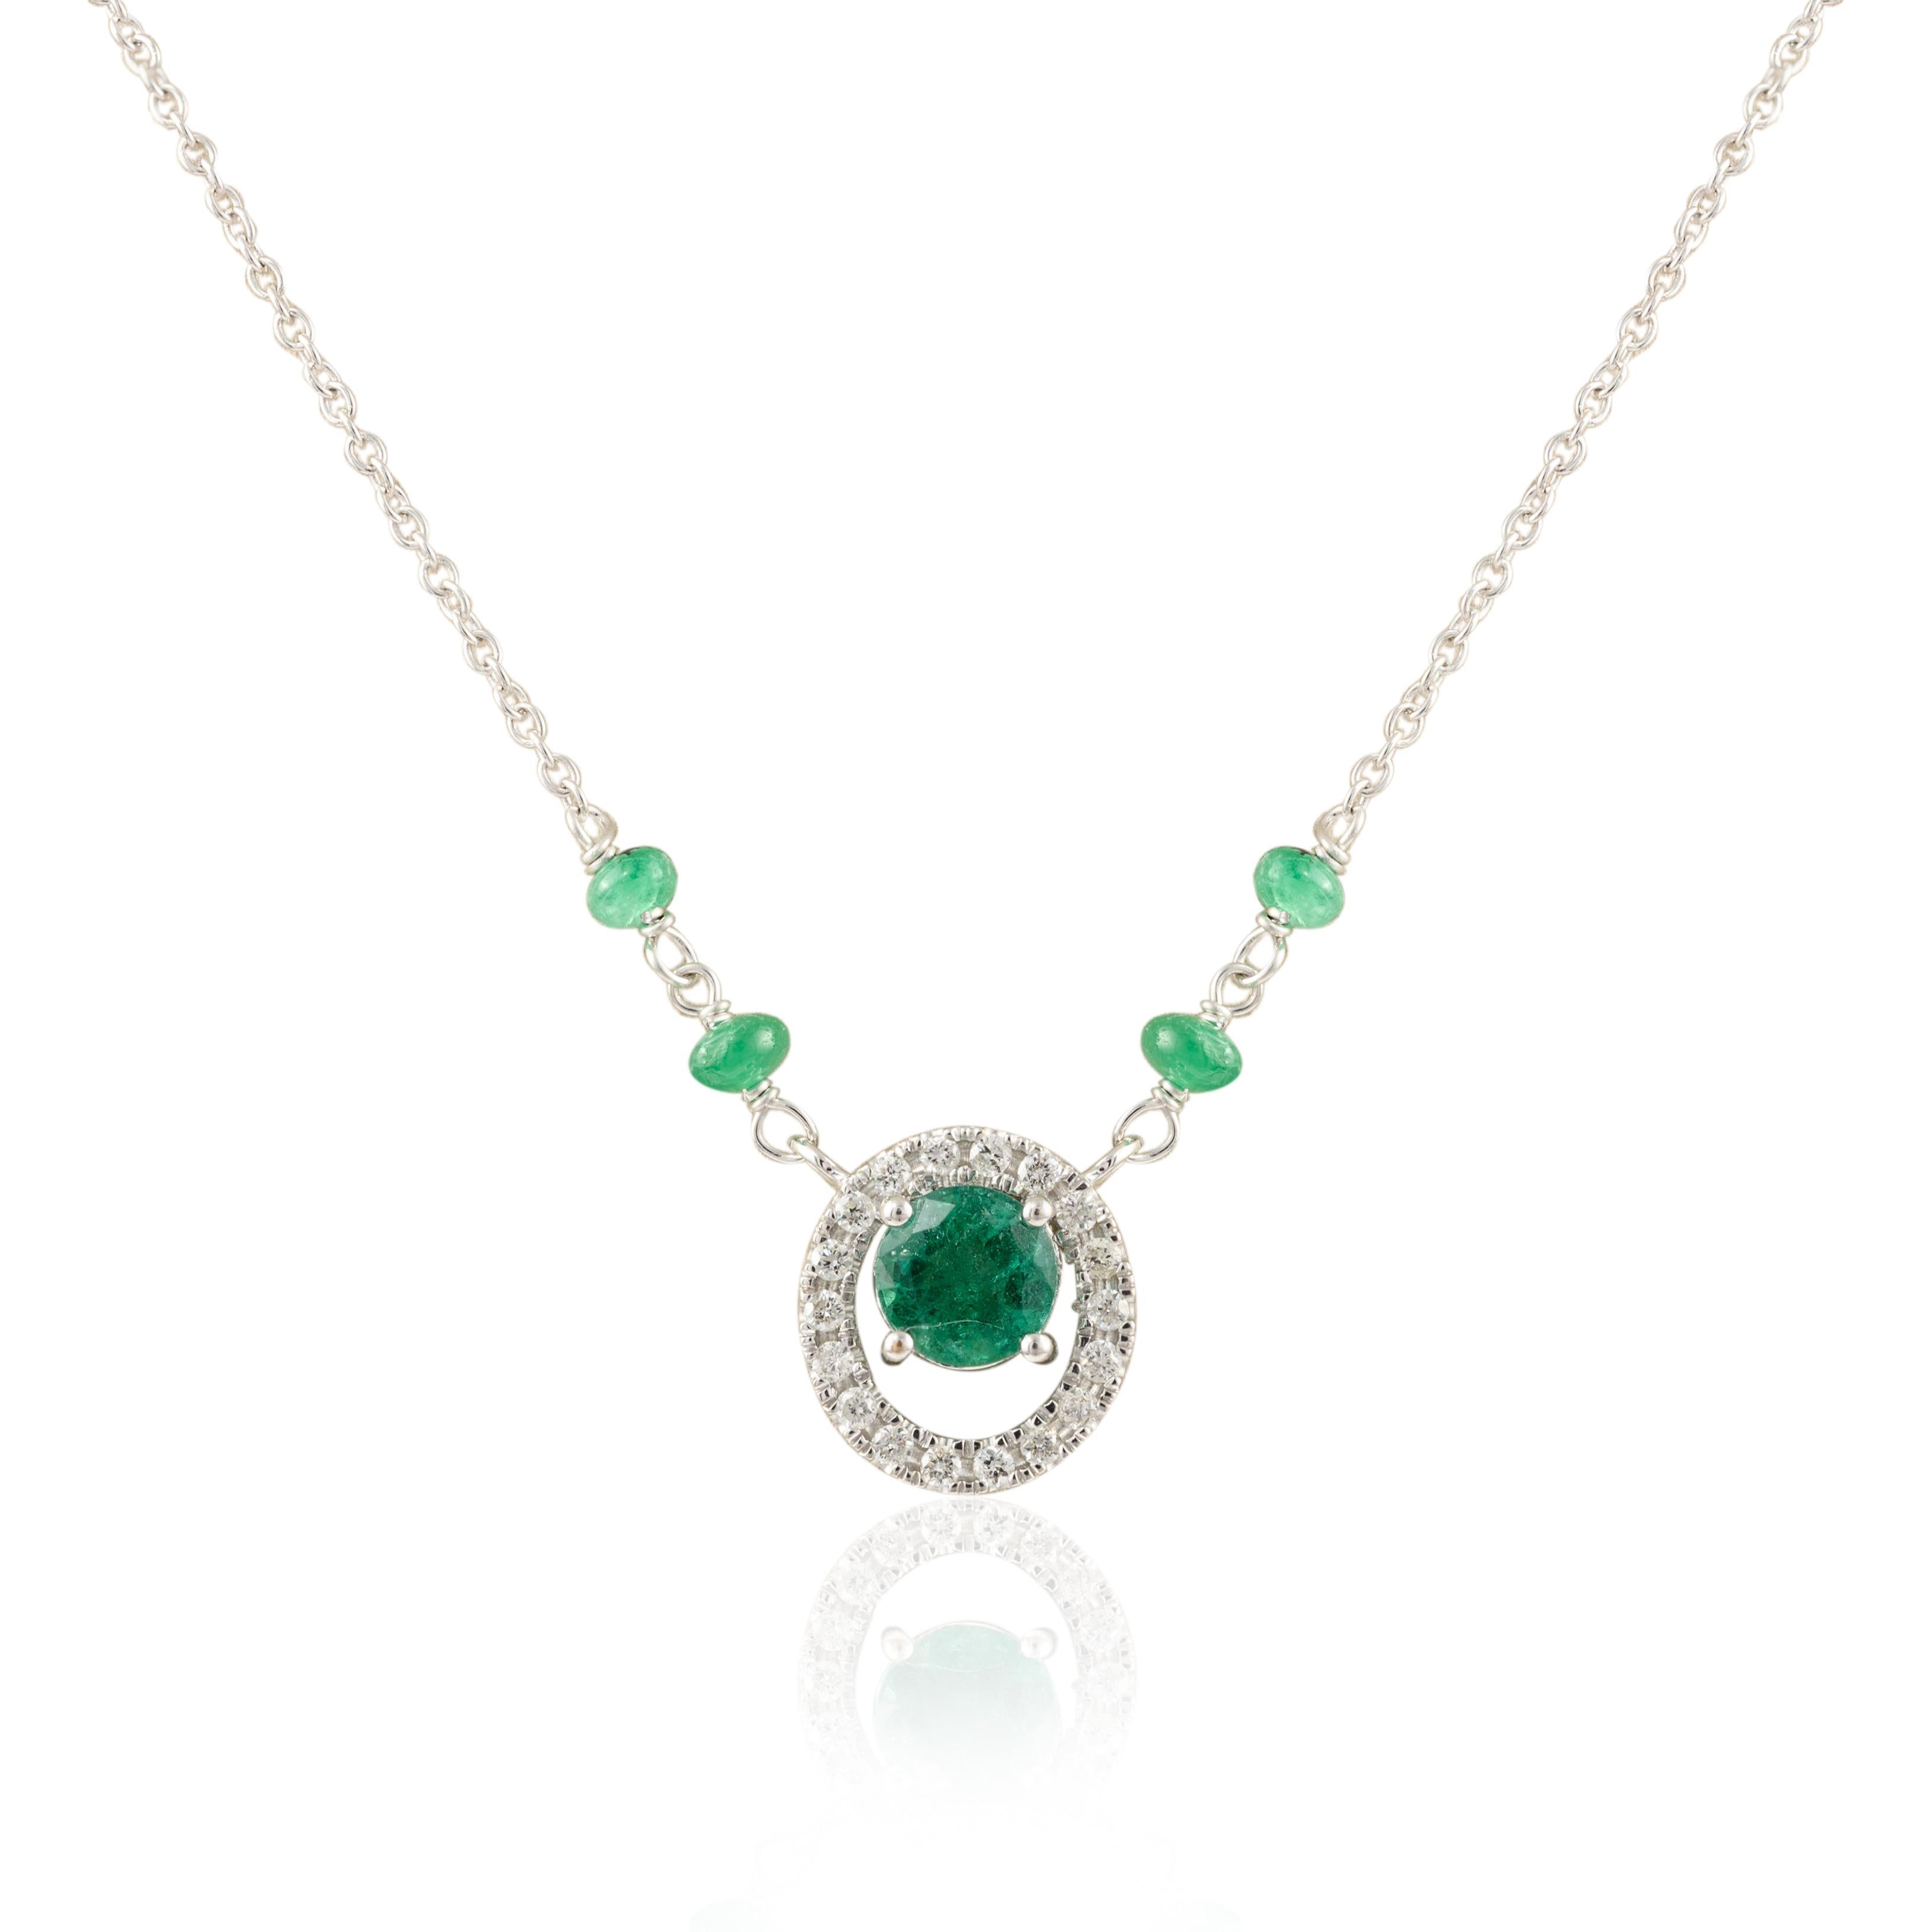 Women's Everyday Emerald Diamond Necklace 18k Solid White Gold, Fine Jewelry Gift For Sale